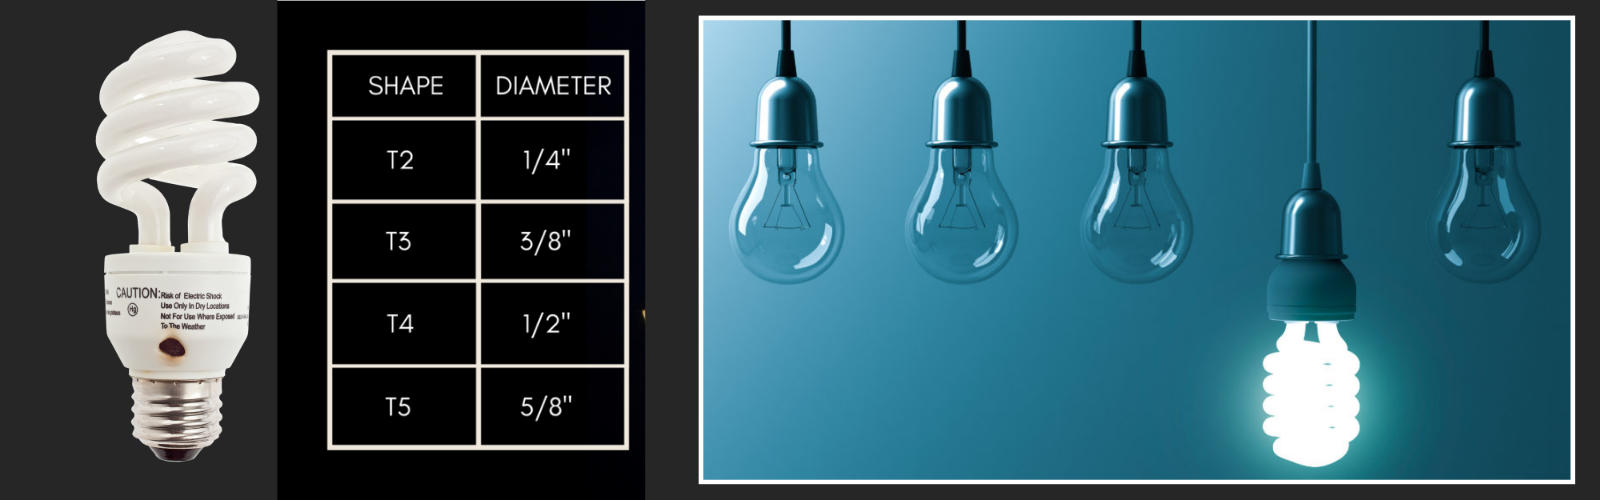 cfl sizes and dimension, showing fried cfl bulb